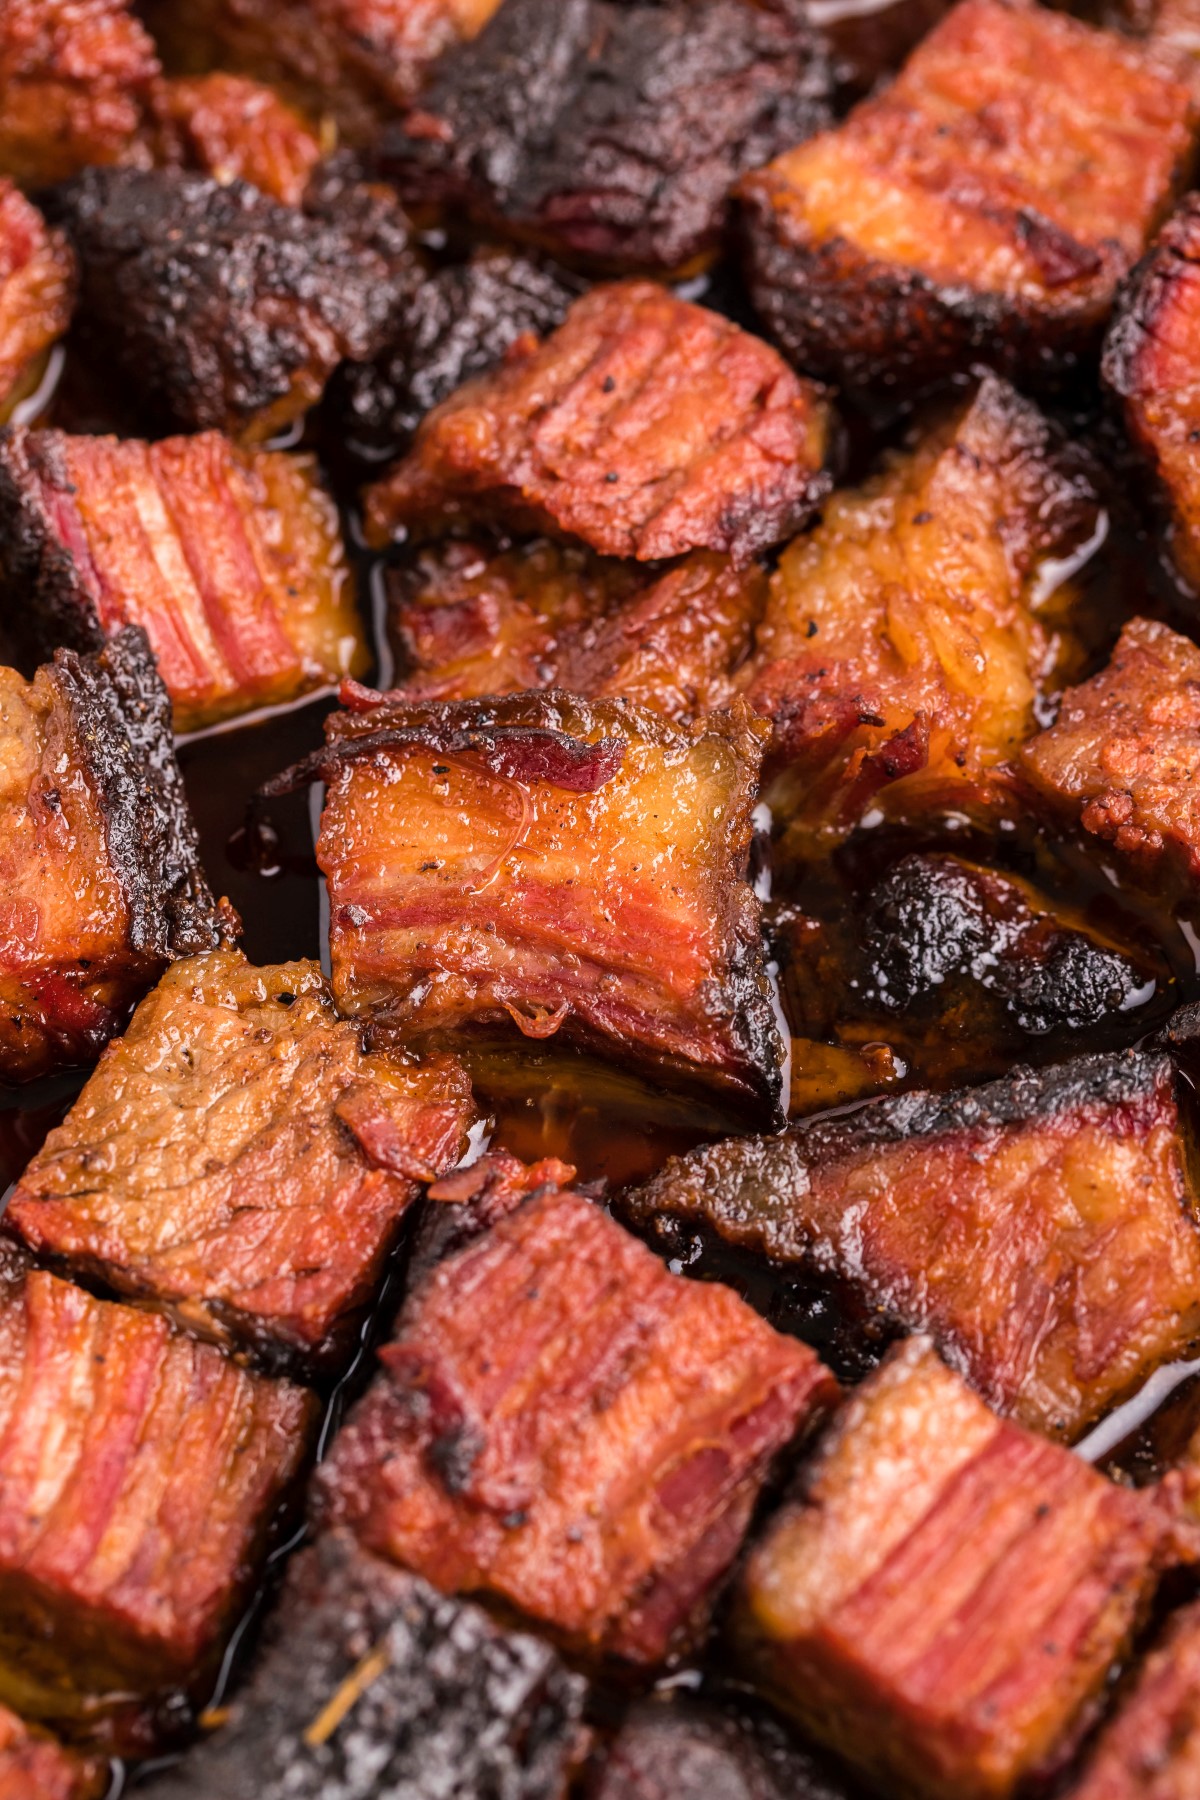 Smoked burnt ends ready to be eaten!